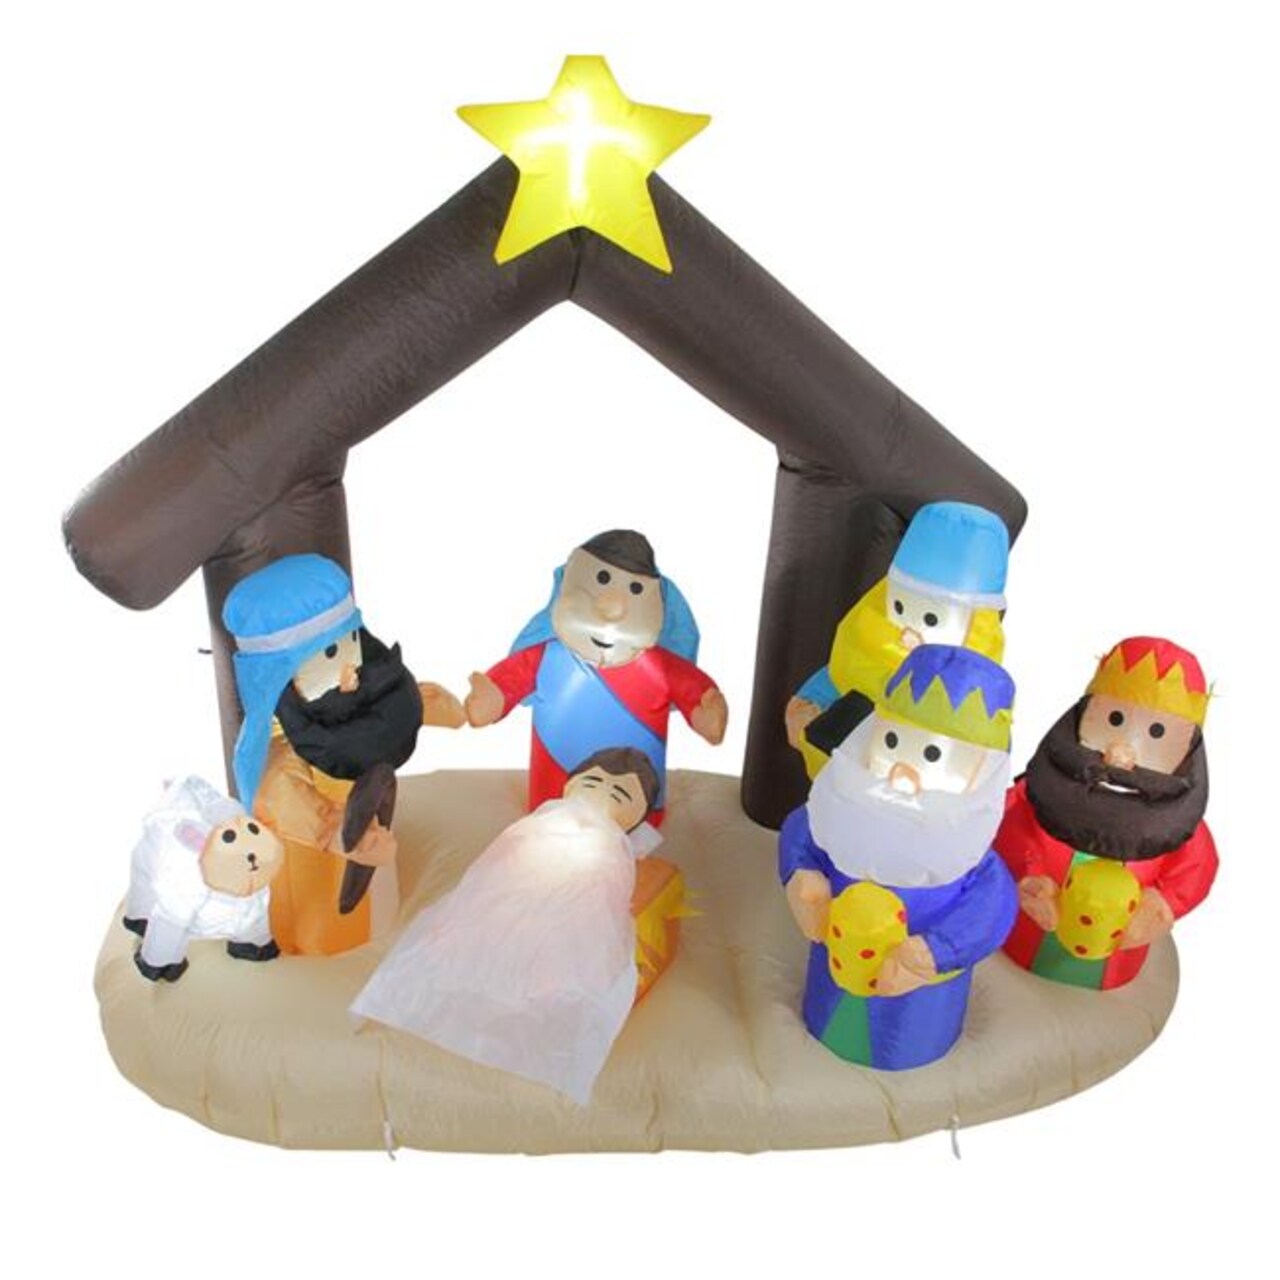 Northlight 32912561 5.5 ft. Inflatable Nativity Scene Lighted Christmas Outdoor Decoration